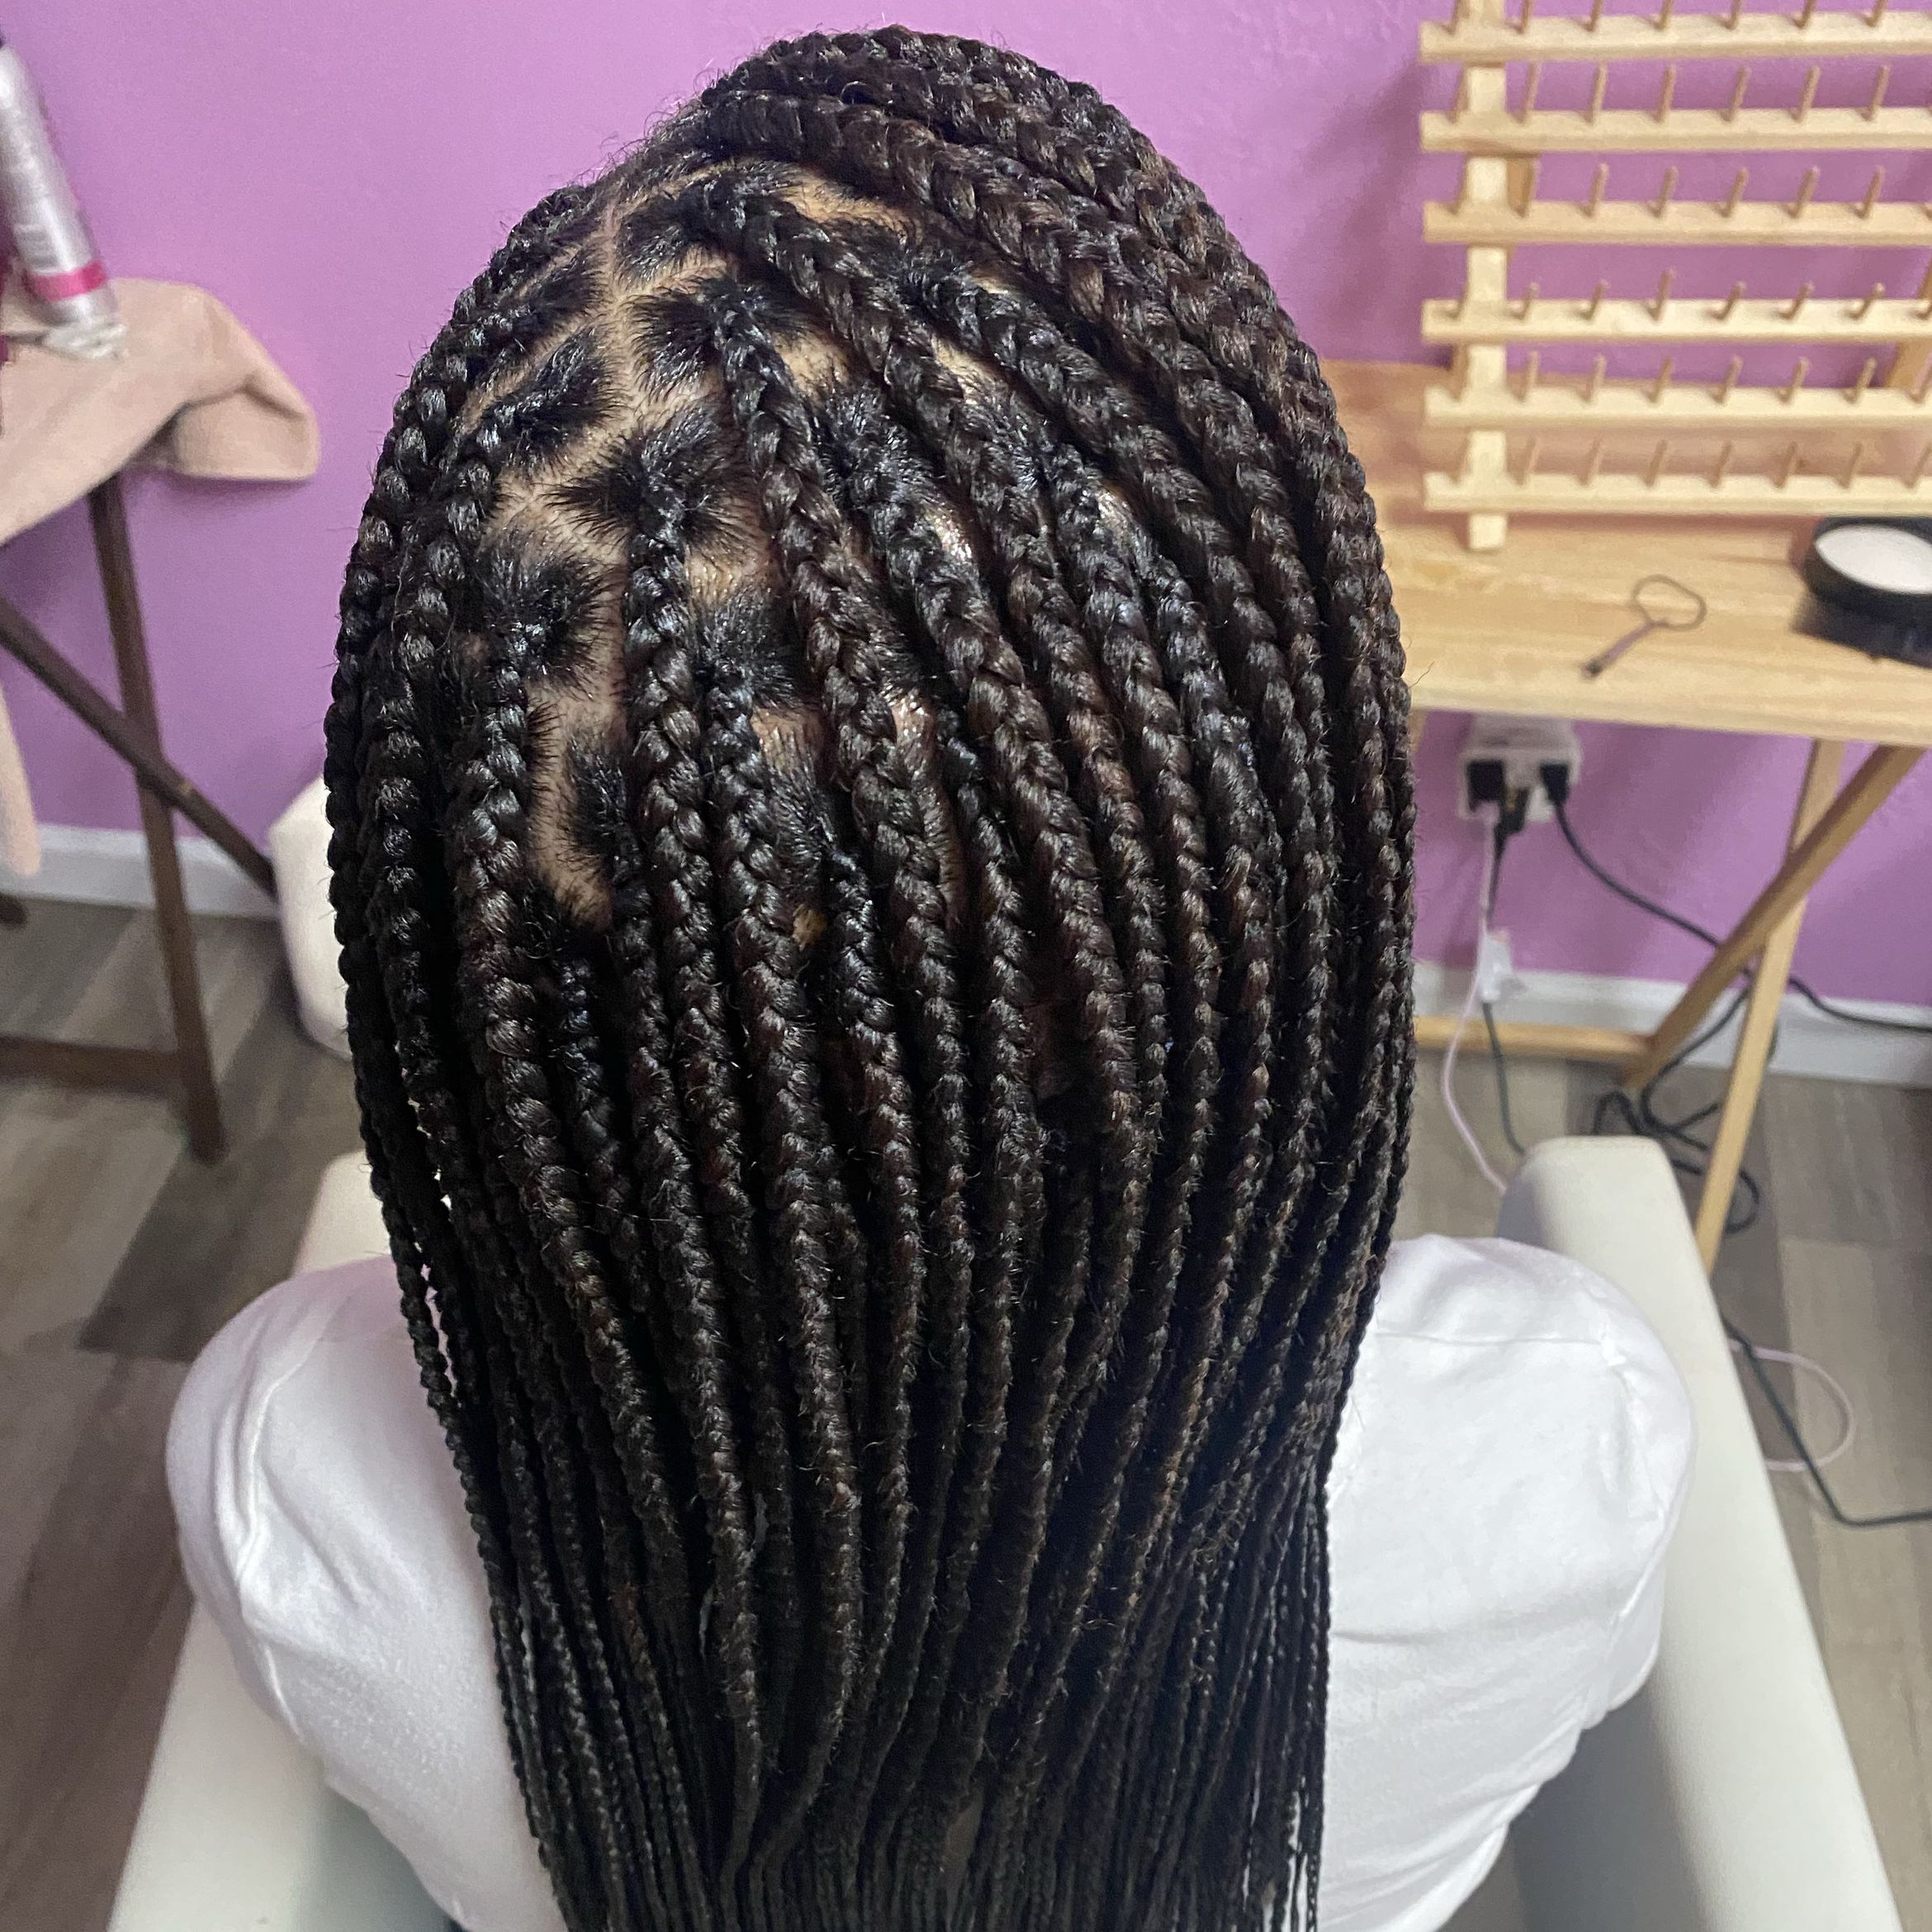 Alida African Hair Braiding, 15608 Spring Hill Ln, Suite 110, Pflugerville, 78660